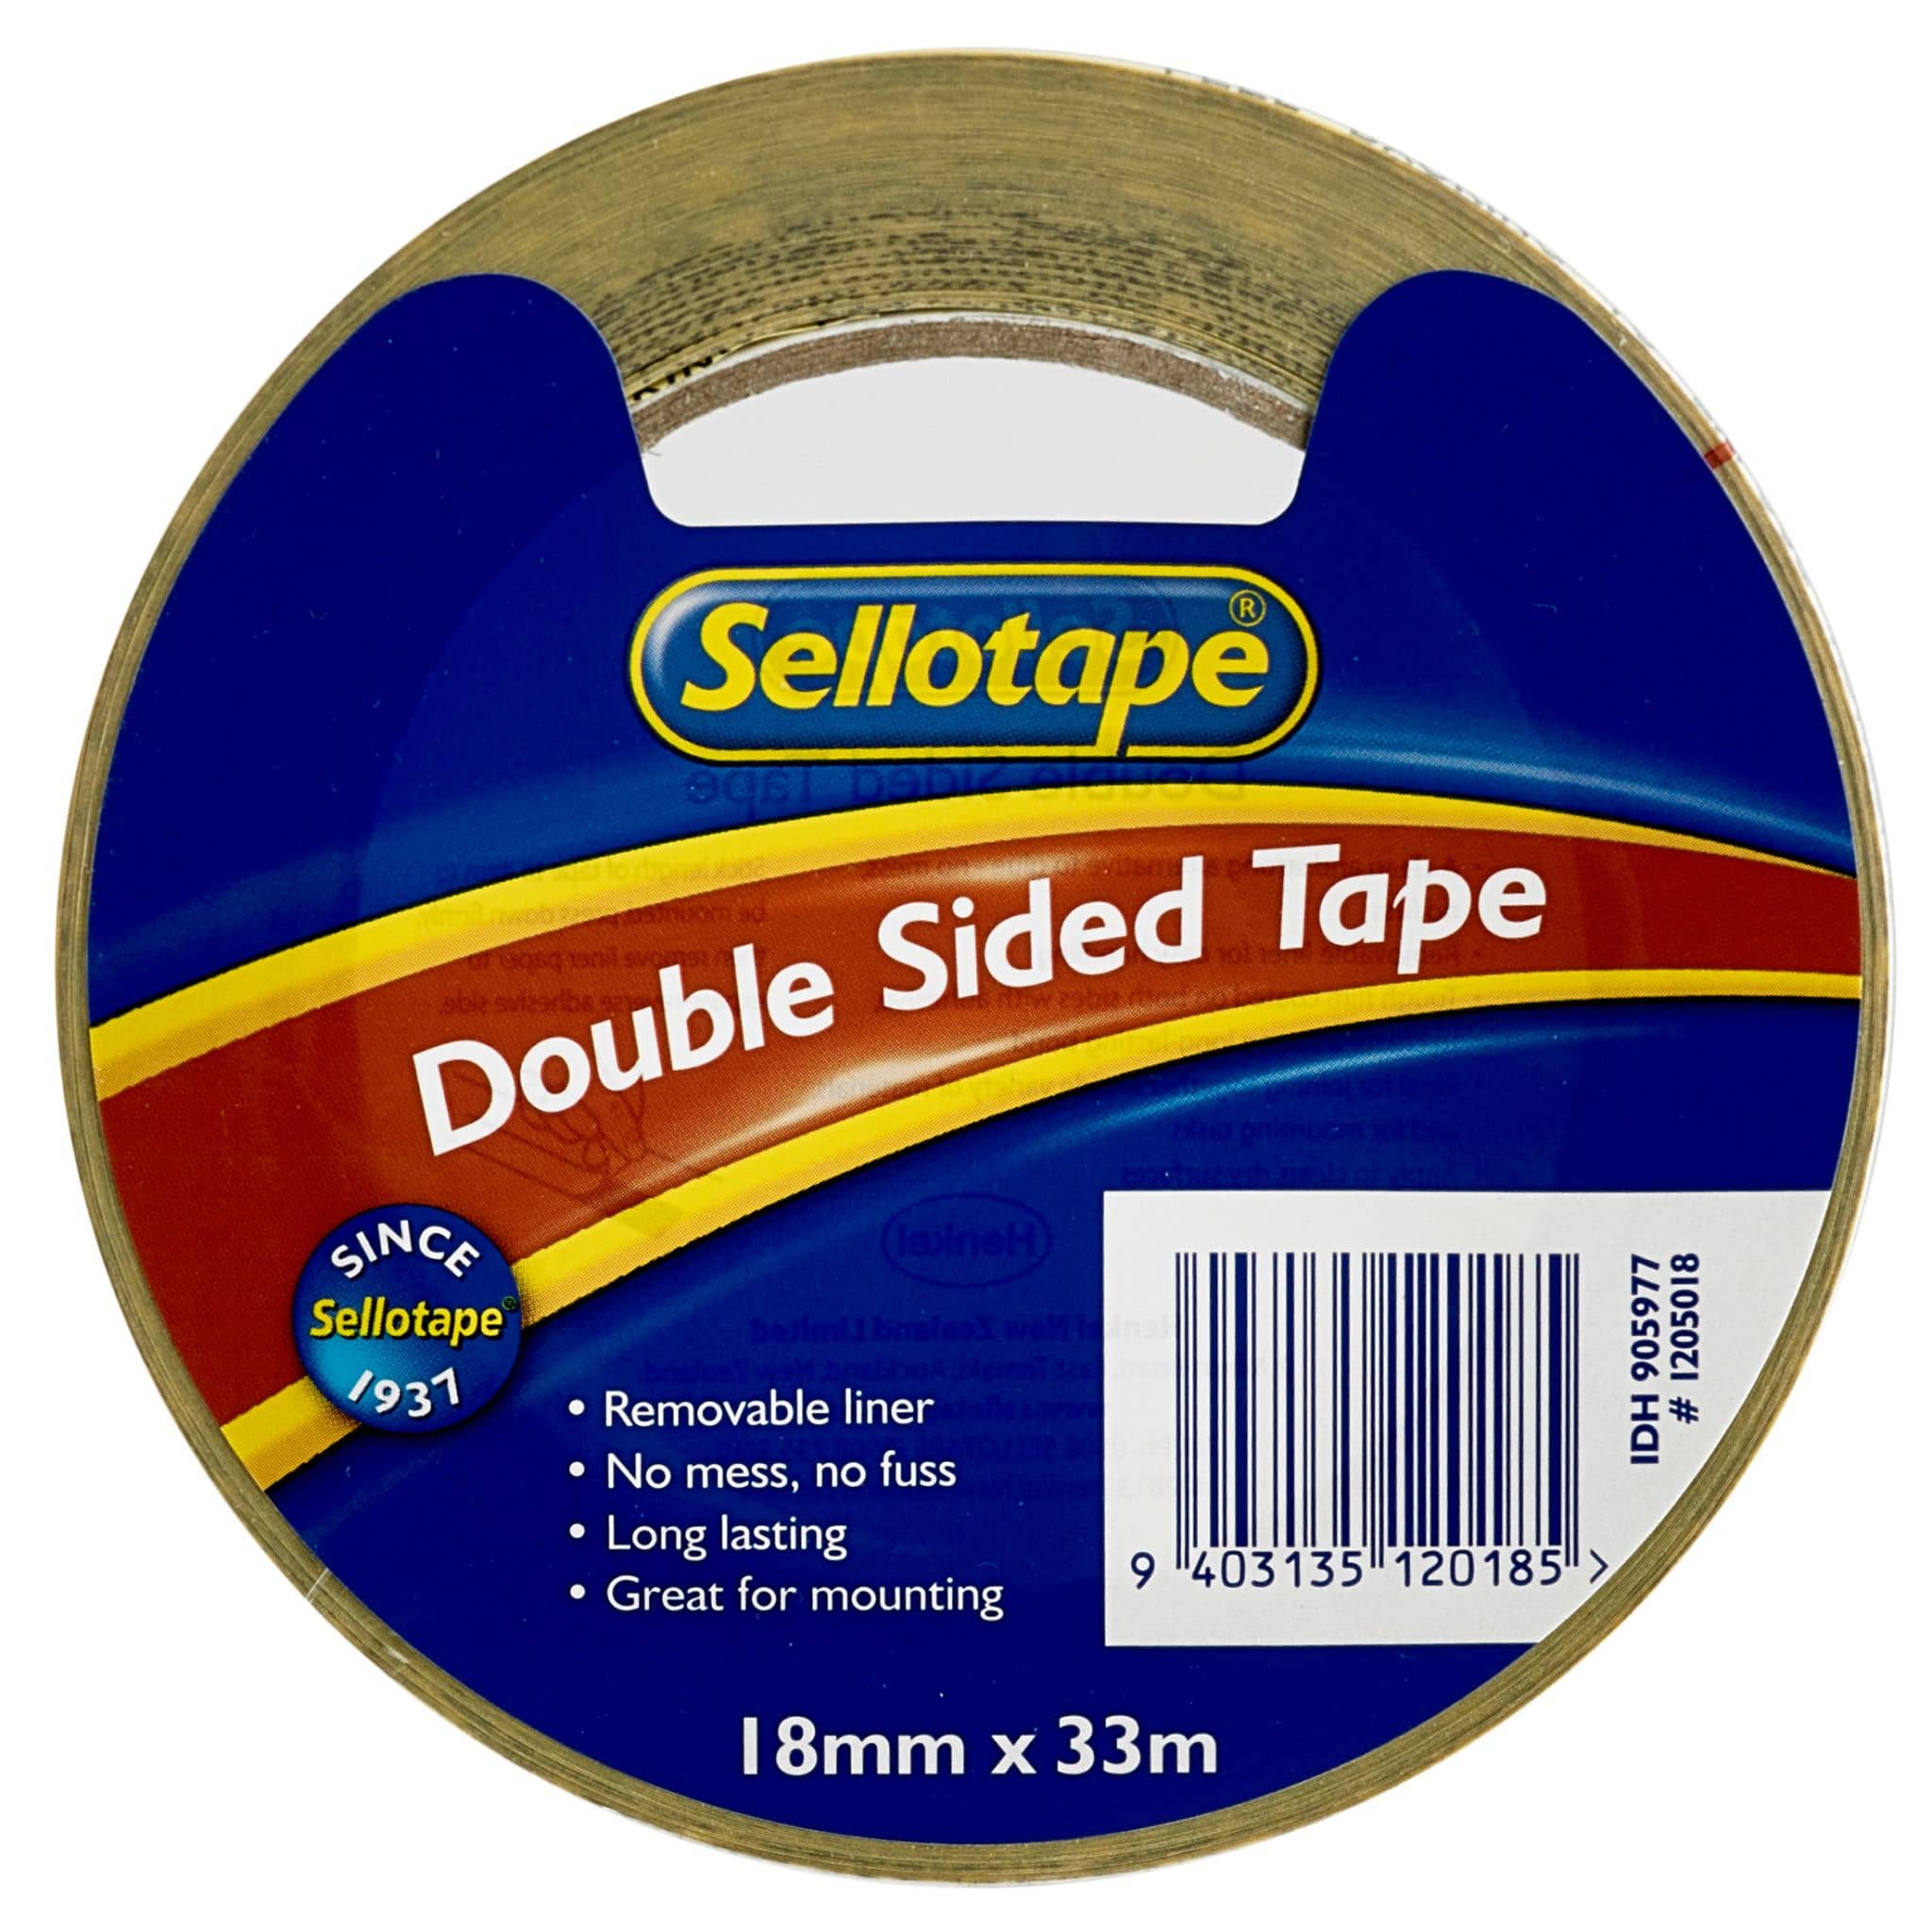 Sellotape 1205 Double-Sided Tape 18x33m